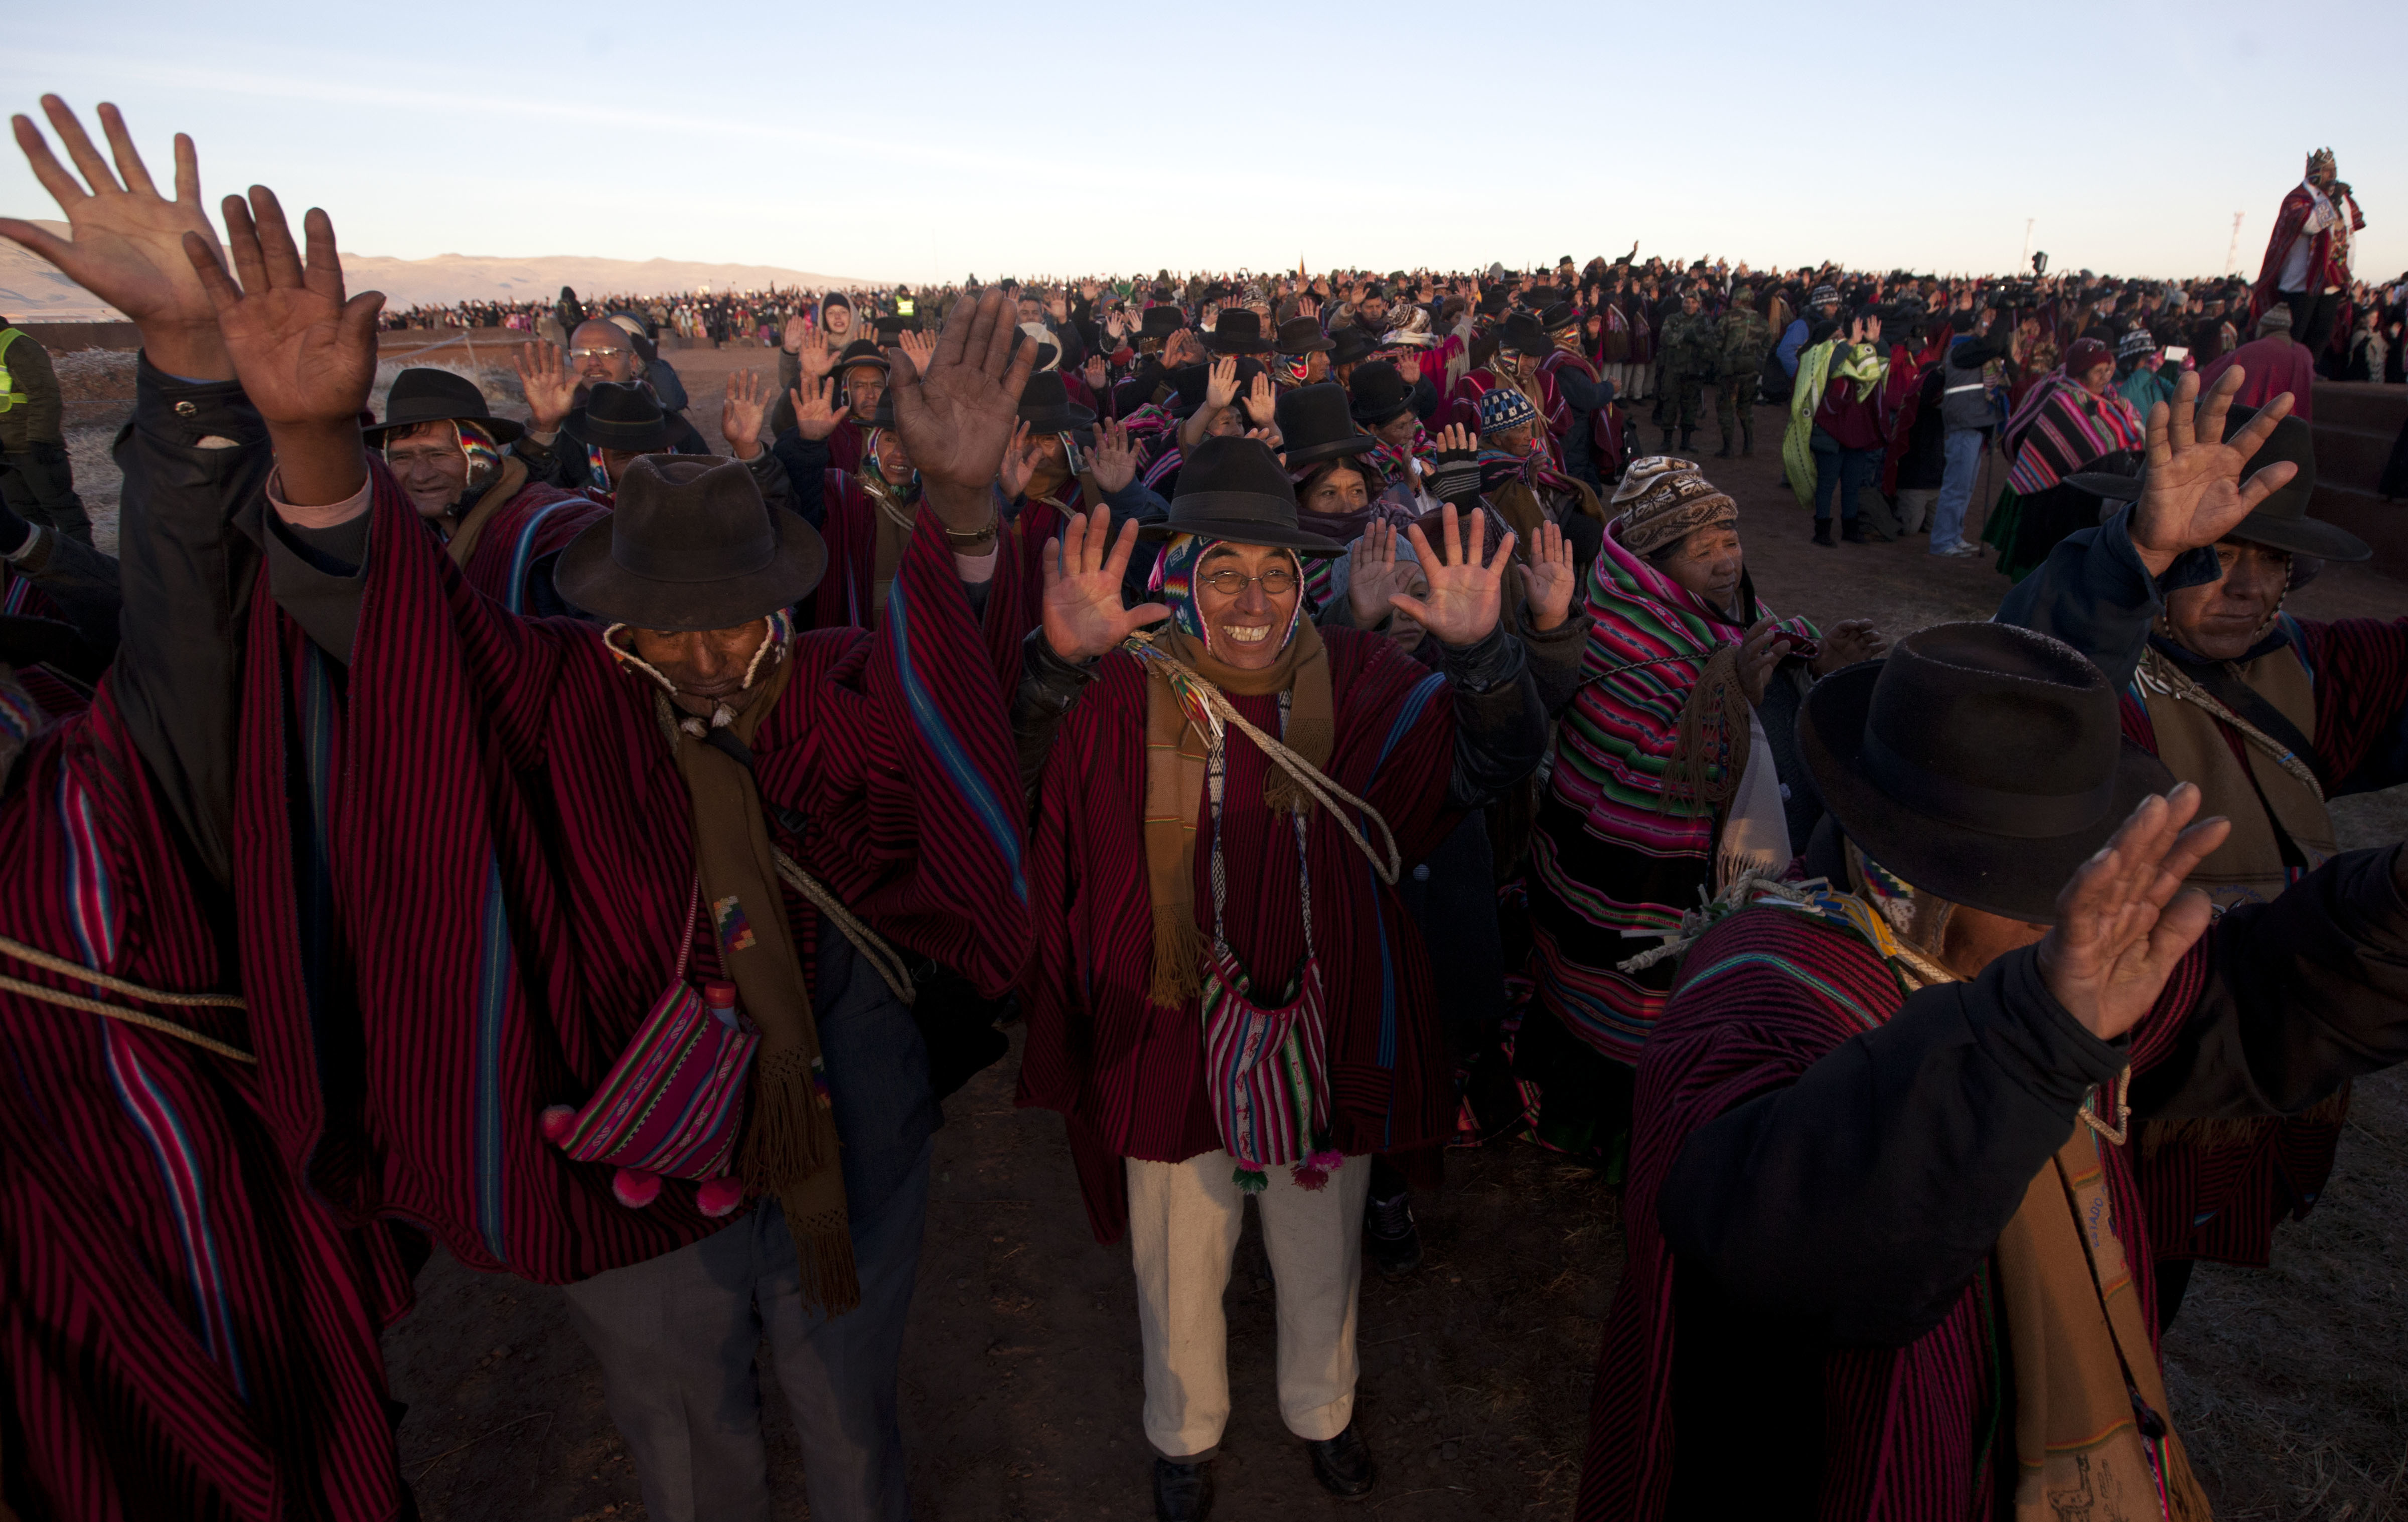 Aymara Indians hold up their hands to receive the first rays of sunlight in a New Year's ritual in the ruins of the ancient city Tiwanaku, Bolivia, early Wednesday, June 21, 2017. Bolivia's Aymara Indians are celebrating the year 5,525 as well as the Southern Hemisphere's winter solstice, which marks the start of a new agricultural cycle. (AP Photo/Juan Karita)